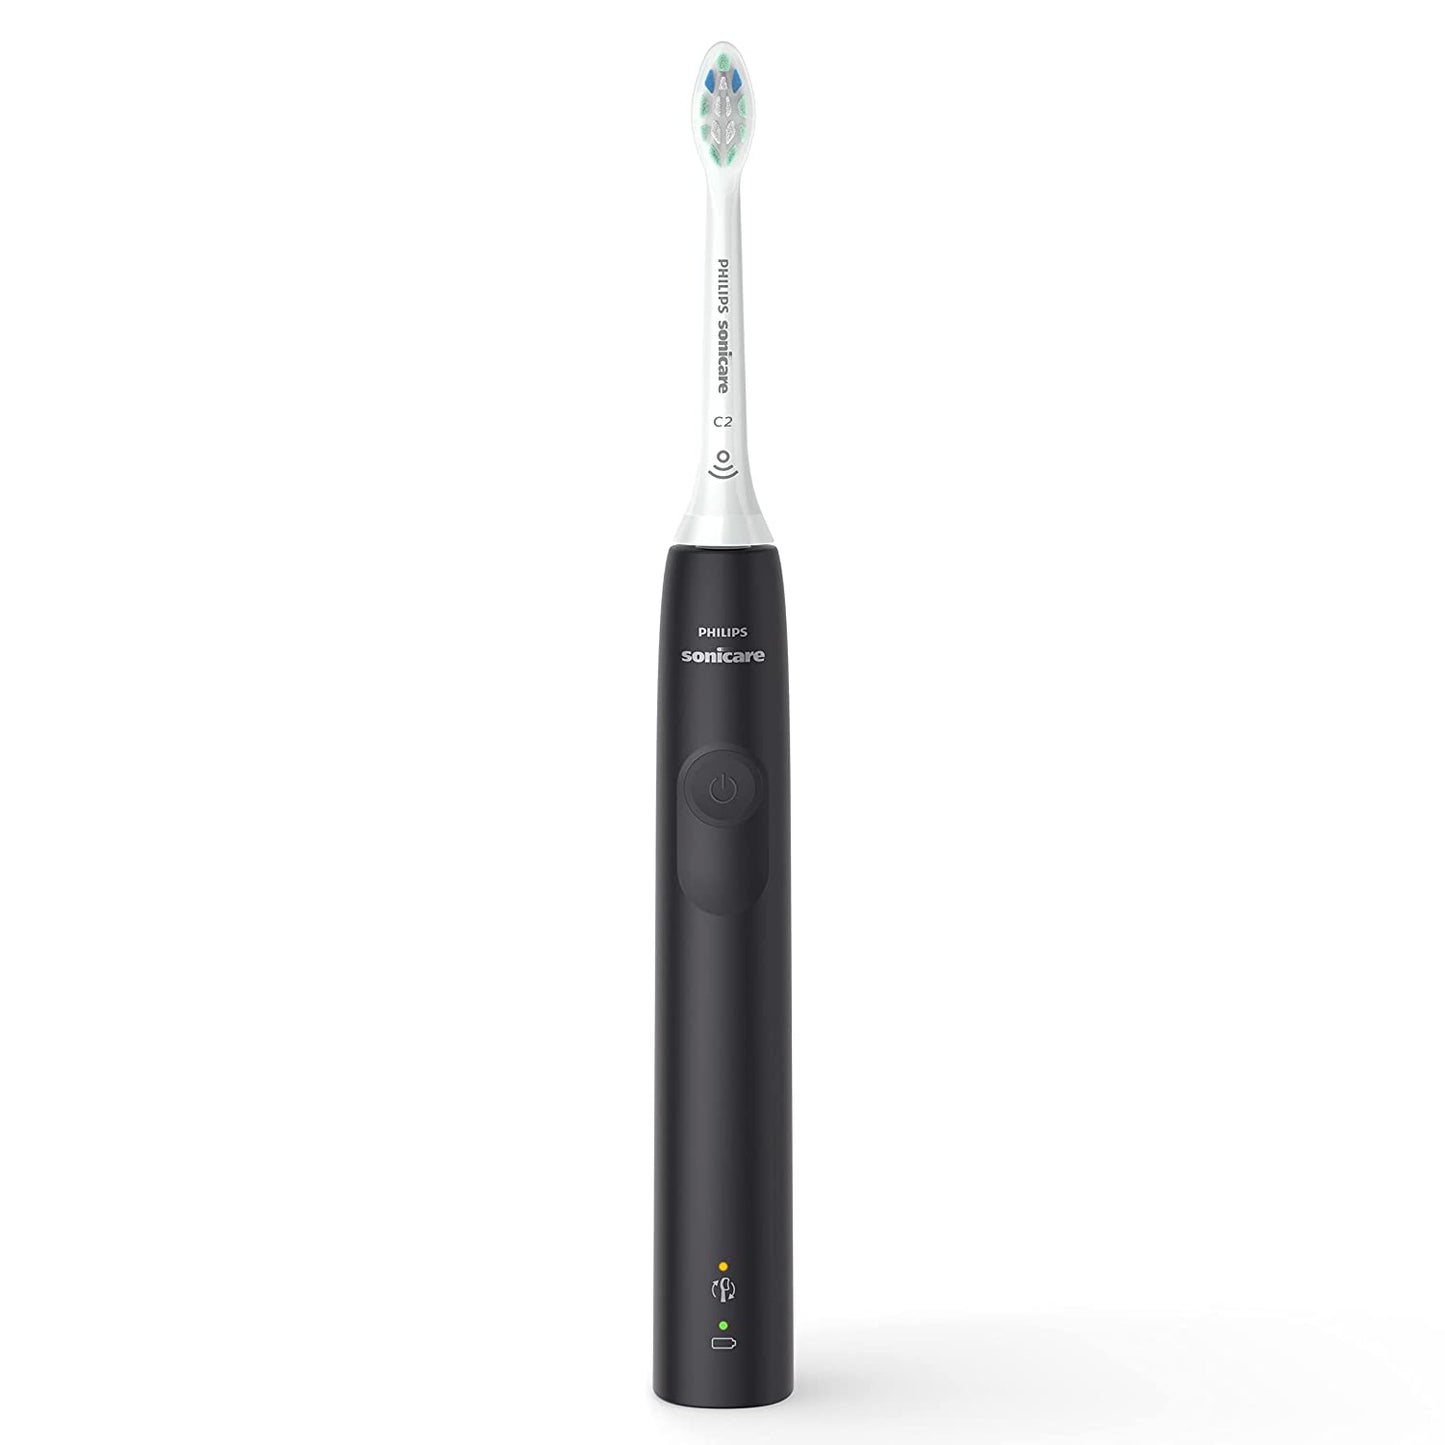 Philips Sonicare 4100 Power Toothbrush, Rechargeable Electric Toothbrush with Pressure Sensor, Black HX3681/24